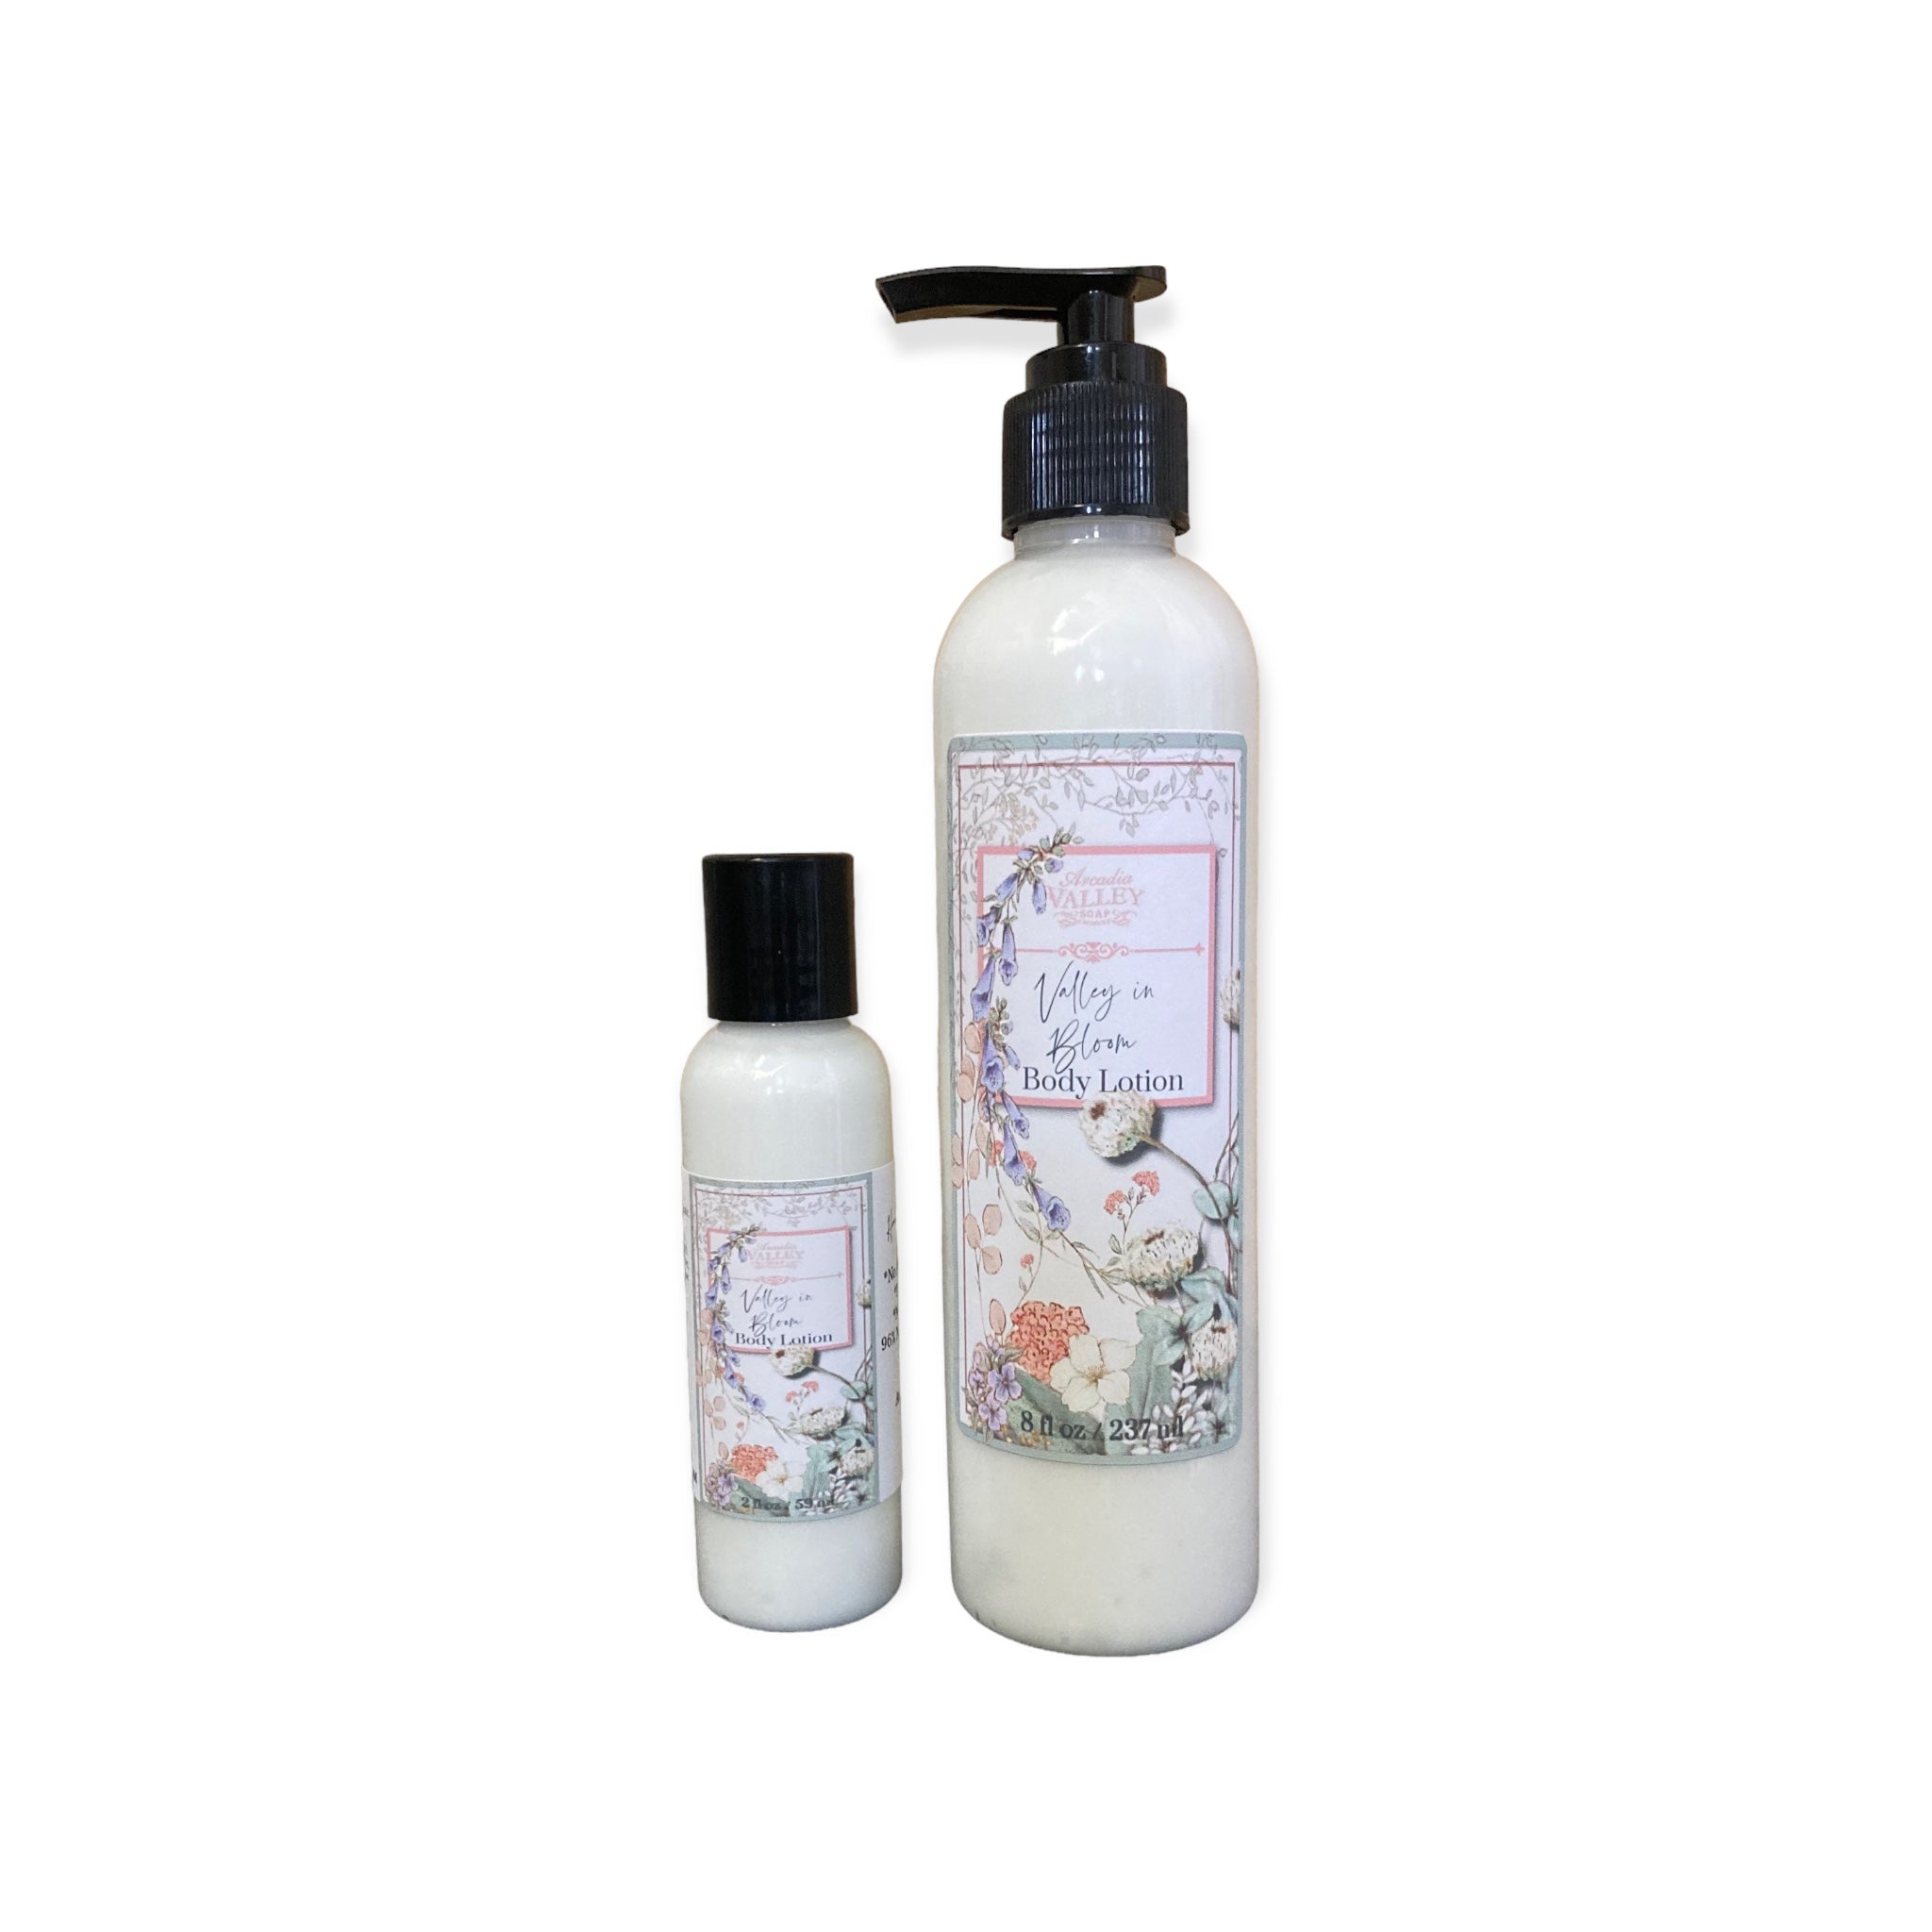 Valley in Bloom Body Lotion